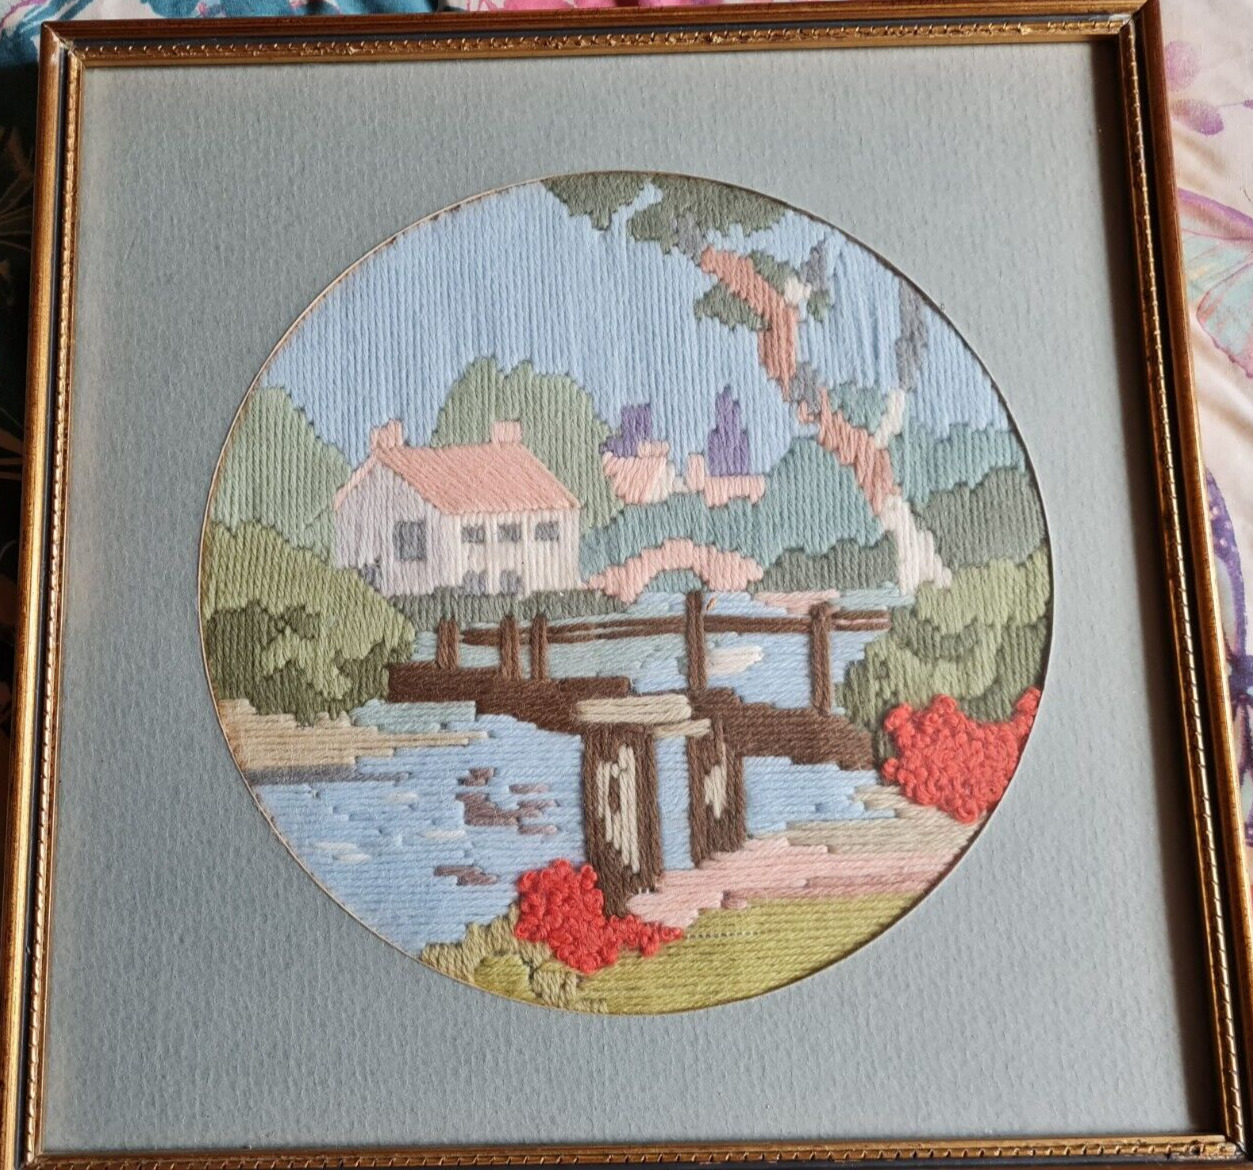 VINTAGE FRAMED EMBROIDERED PICTURE COUNTRY COTTAGE HOUSE GARDEN HAND STITCH